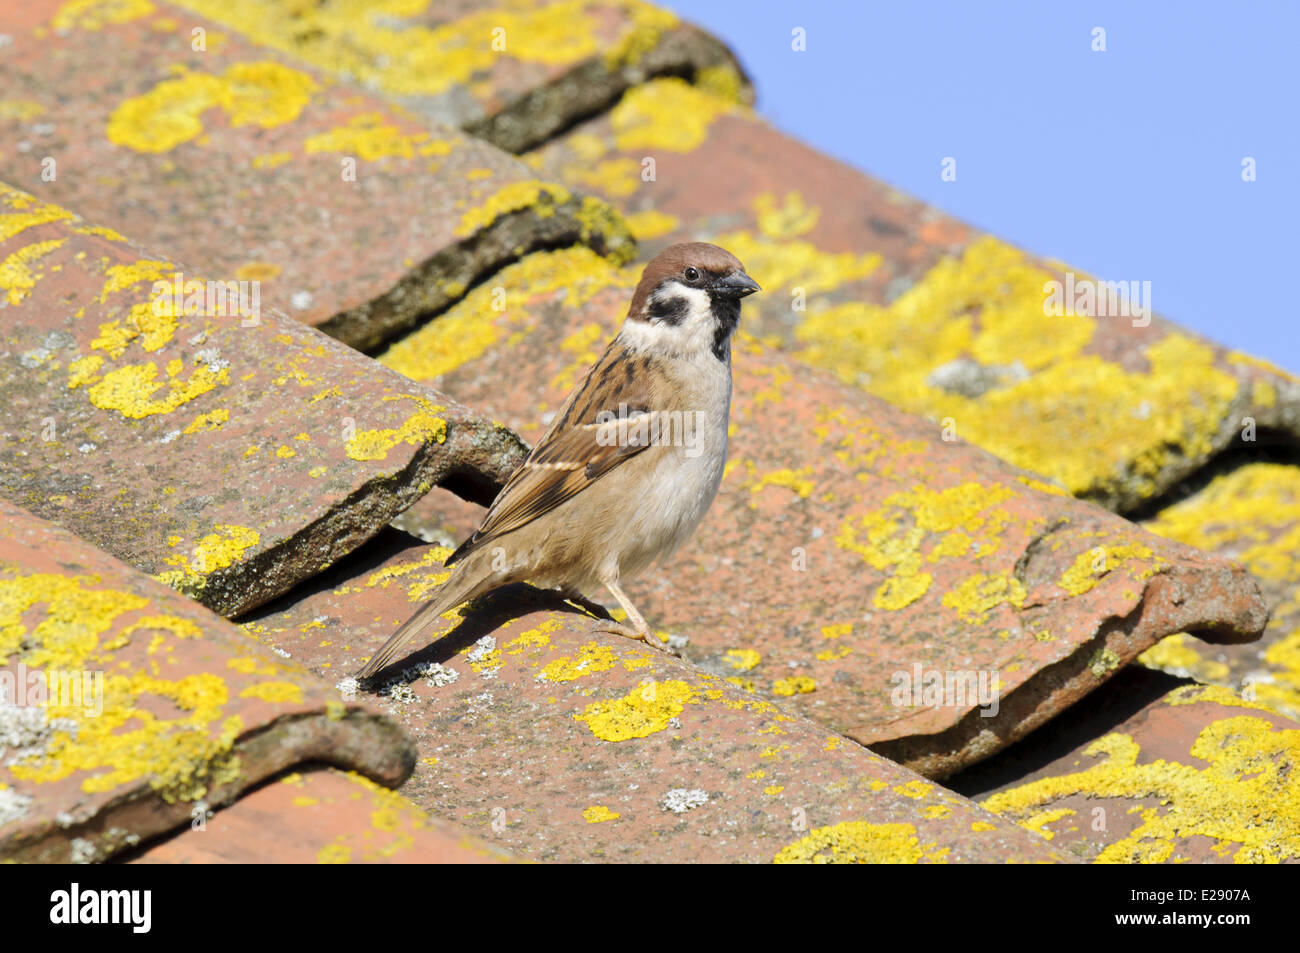 Eurasian Tree Sparrow (Passer montanus) adult, standing on tiled roof of visitor centre, Bempton Cliffs RSPB Reserve, Bempton, East Yorkshire, England, February Stock Photo